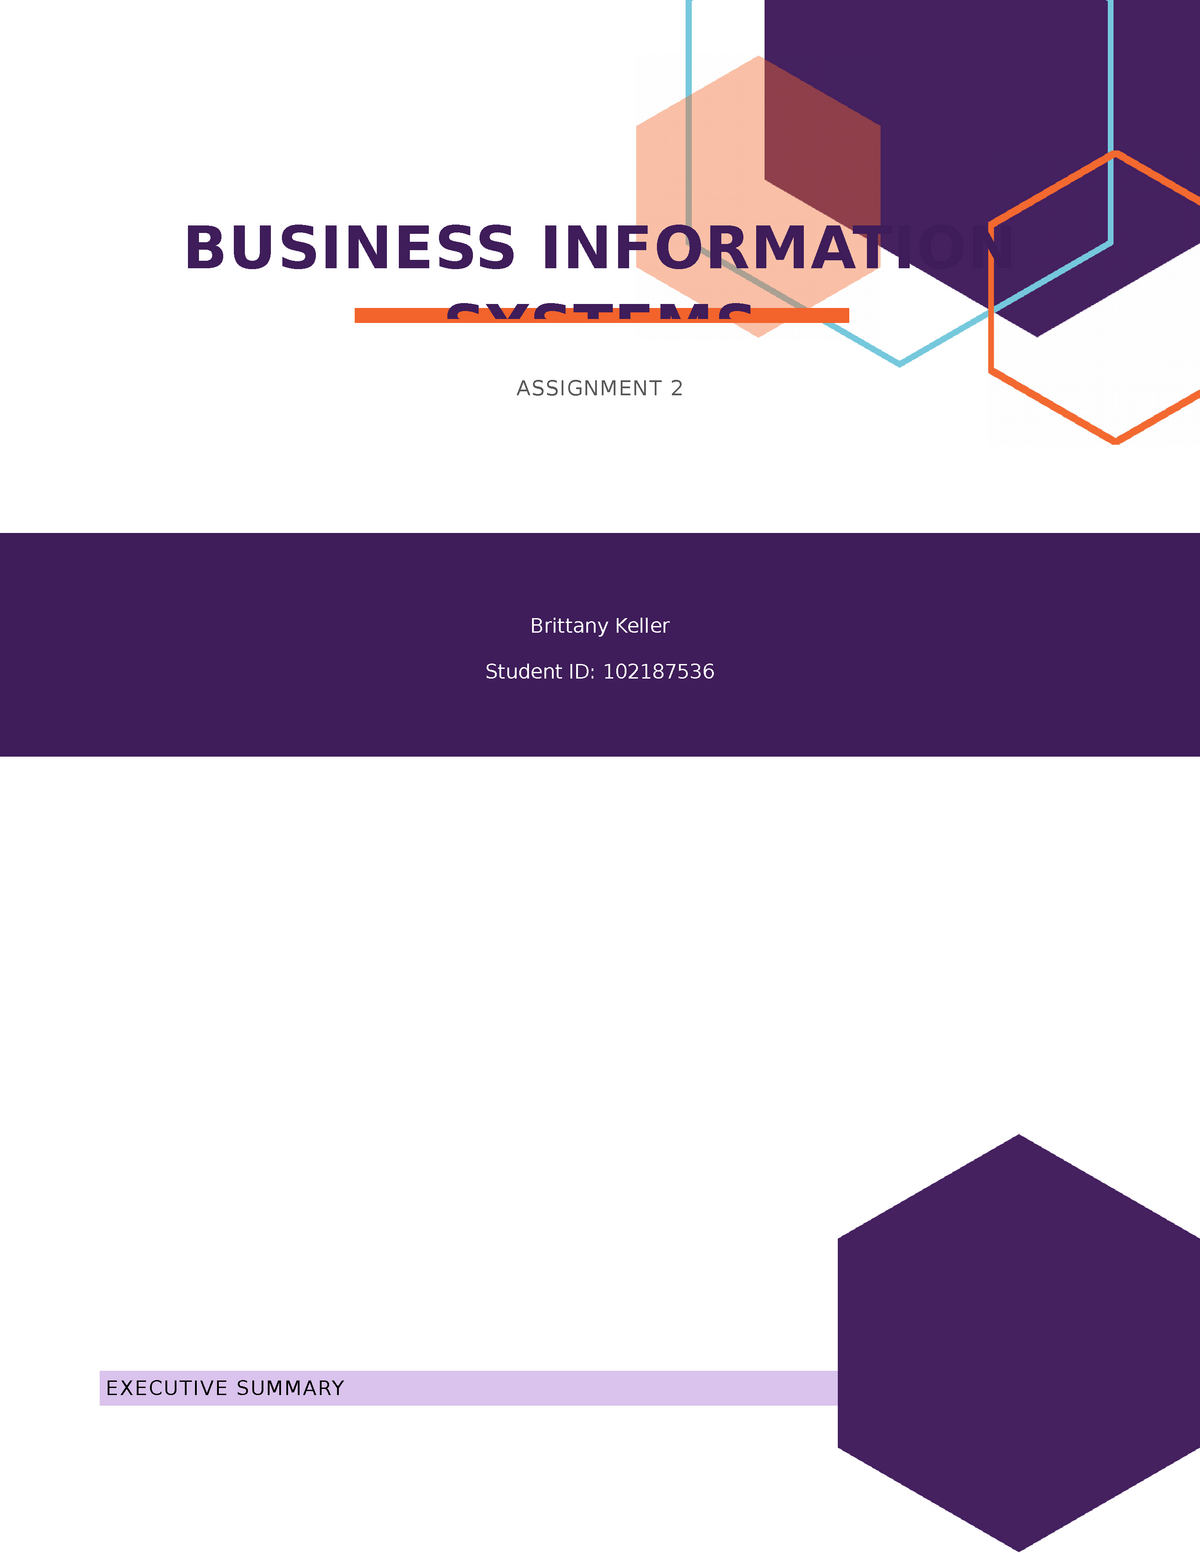 rmit business information systems assignment 2